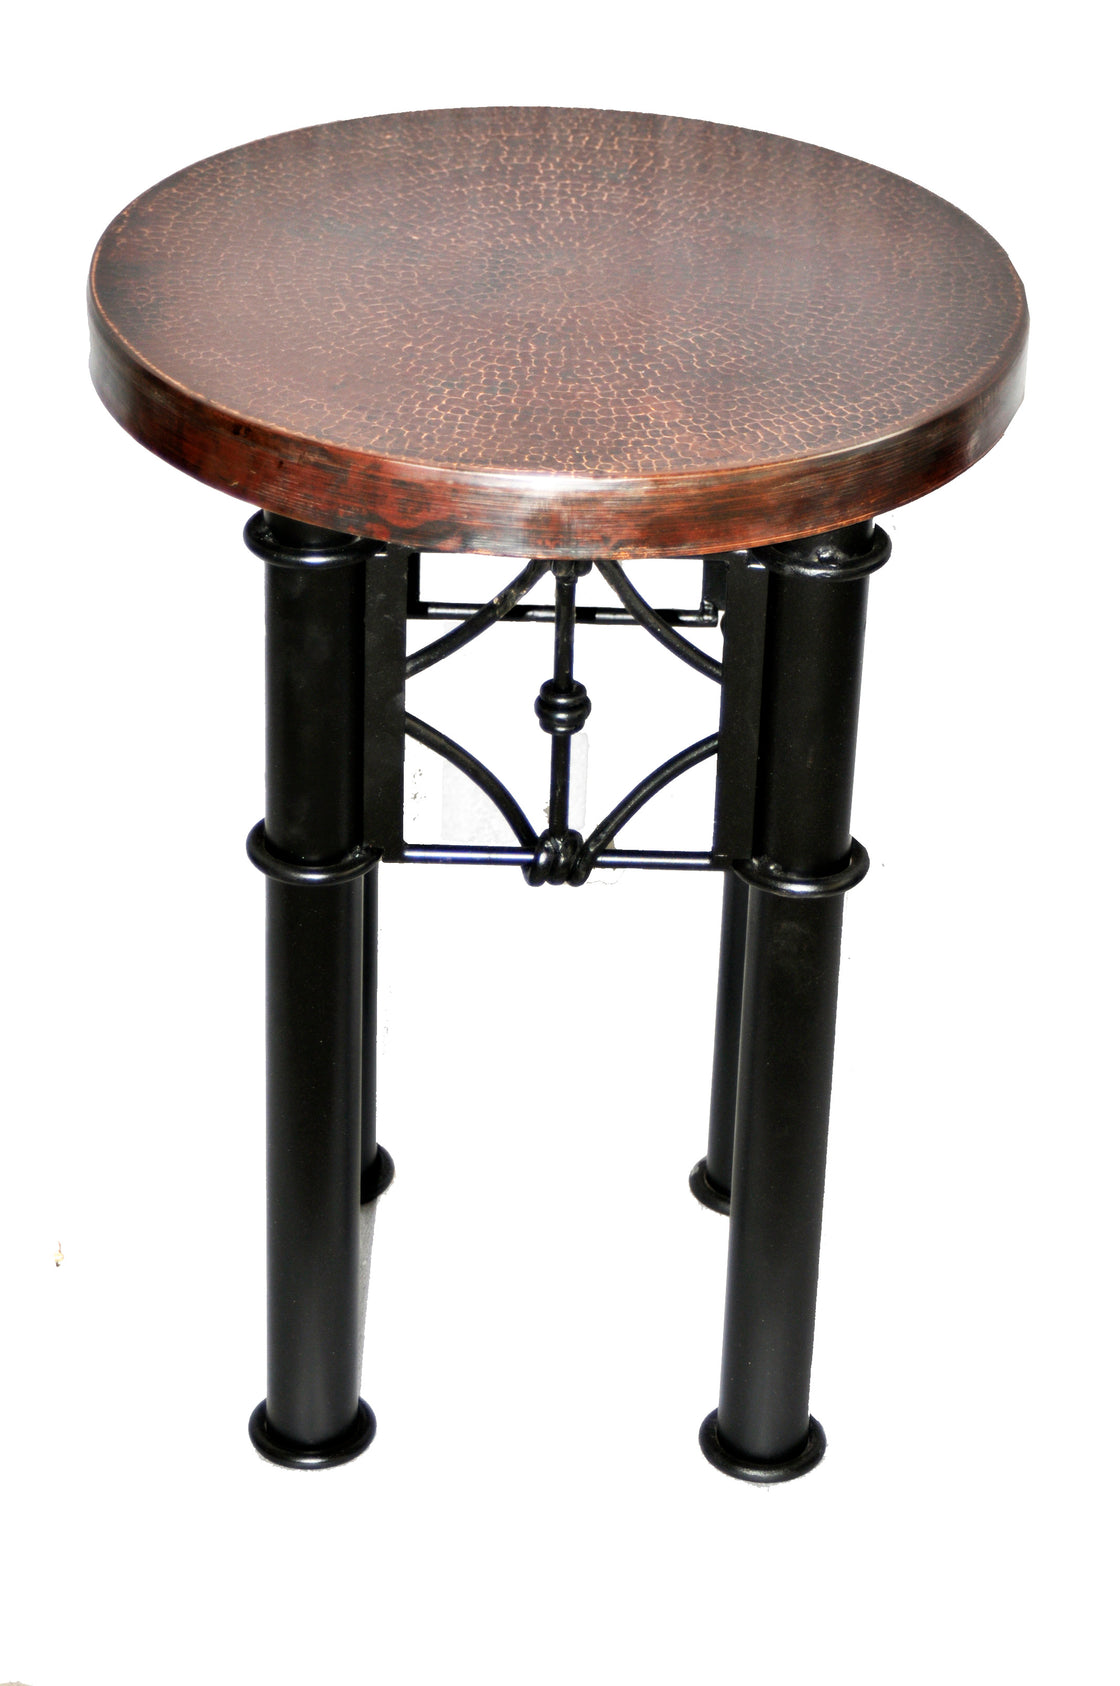 BAMBOO Design - Wrought Iron Table Base Handmade for Coffee Tables, Dining Table, etc (Various Sizes, #TBAS_BAMBOO)